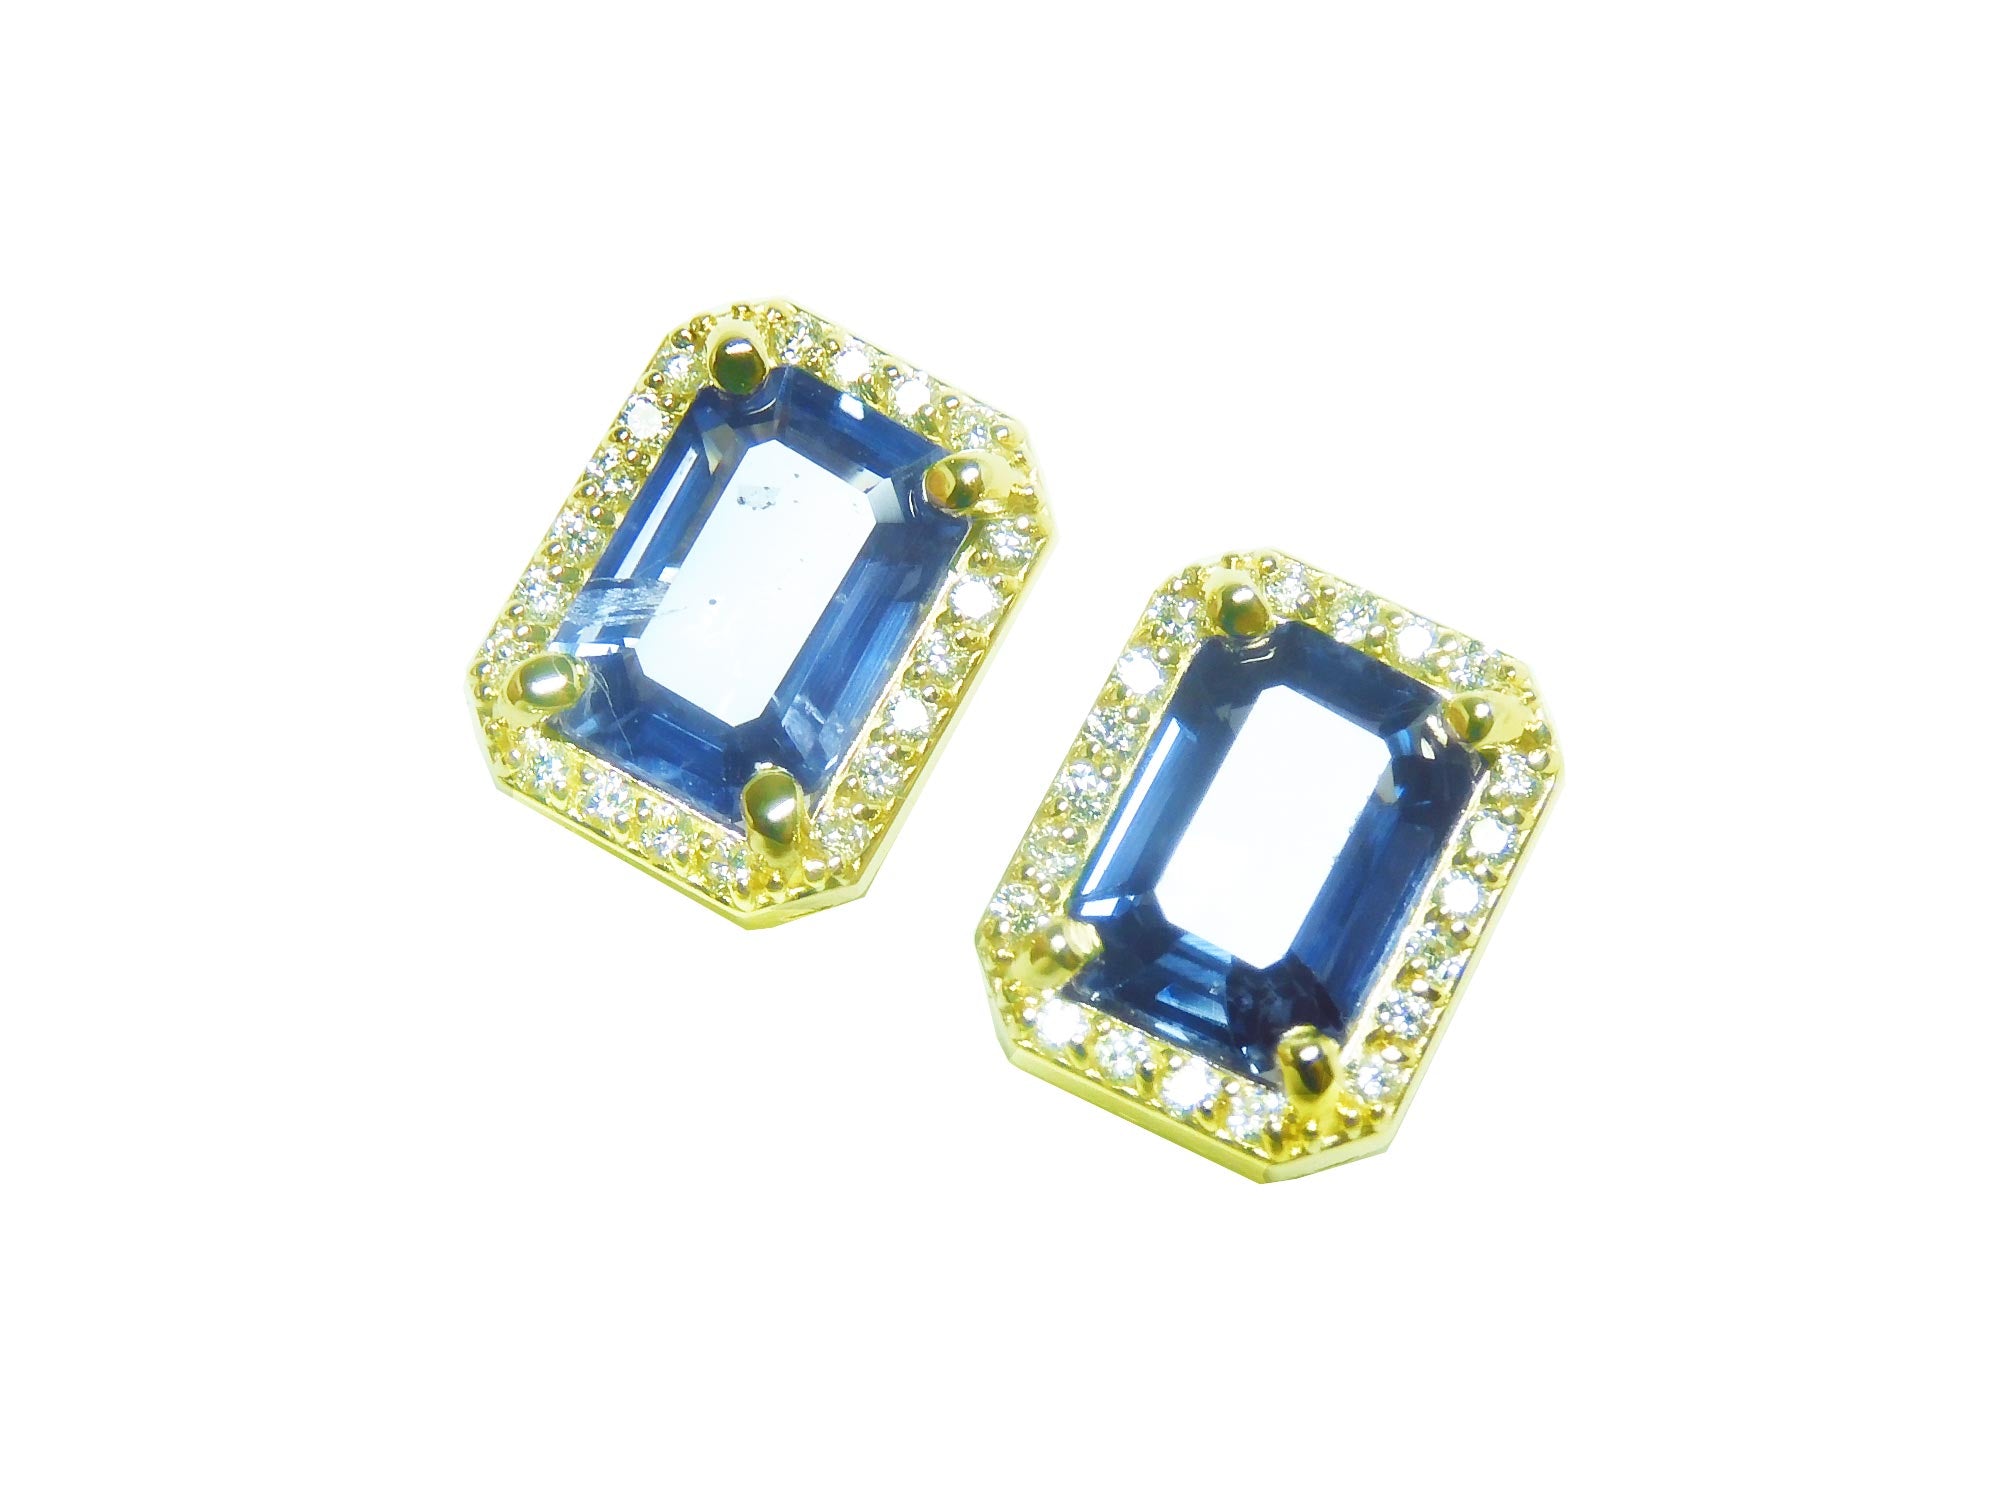 Authentic blue sapphire earrings